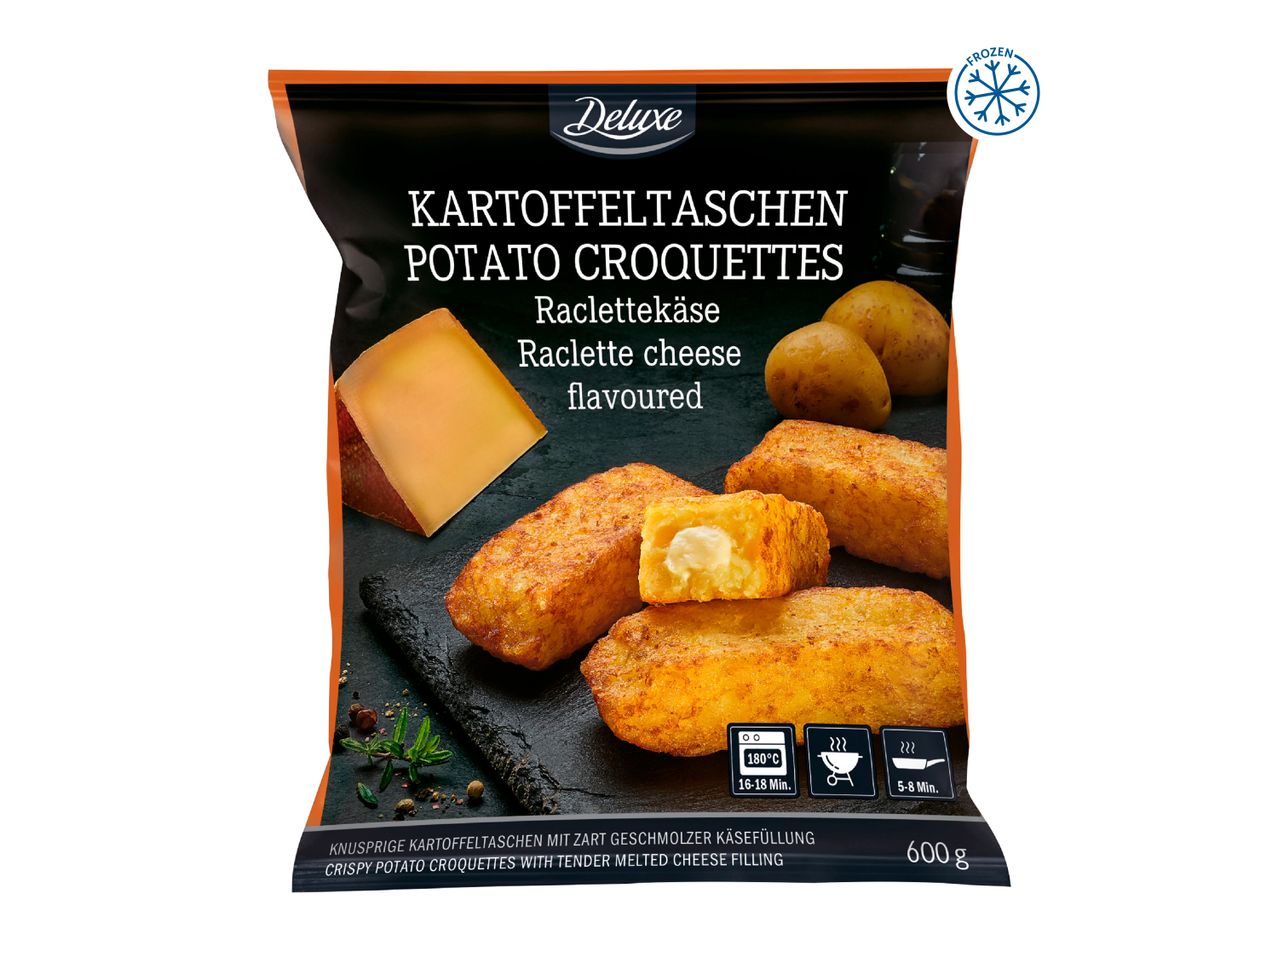 Go to full screen view: Deluxe Potato Parcels with Raclette Cheese - Image 1